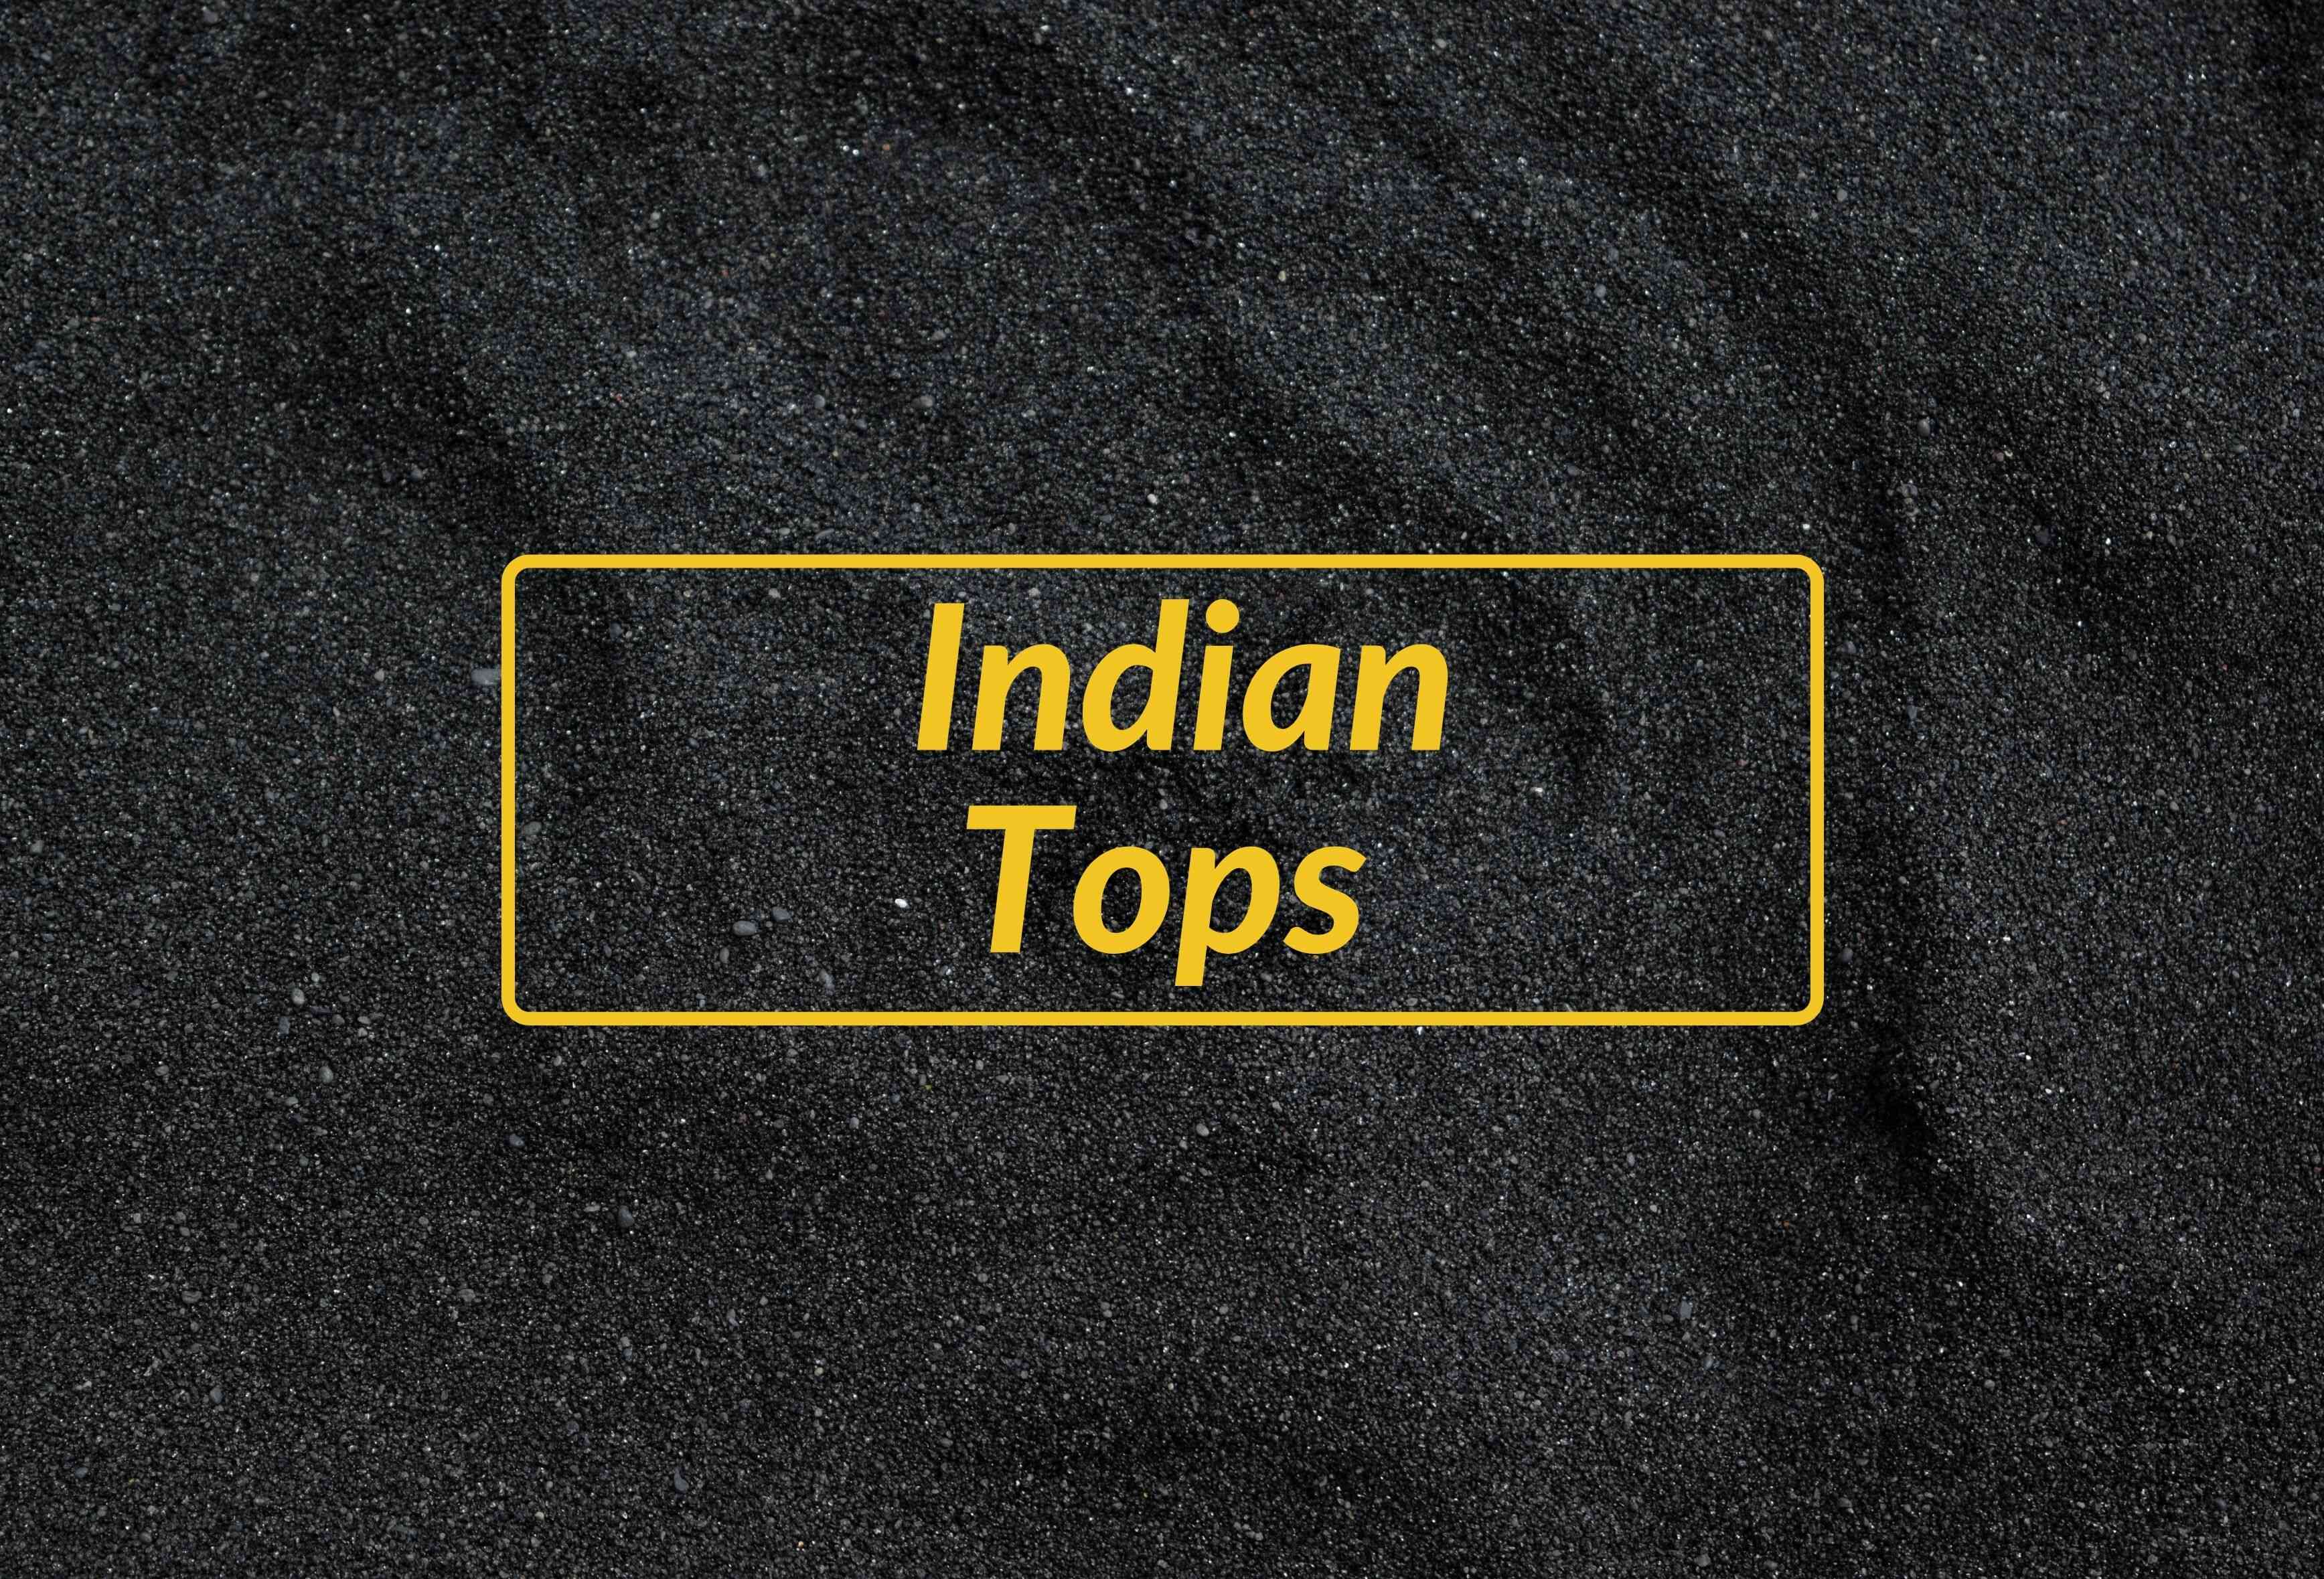 Indian Tops